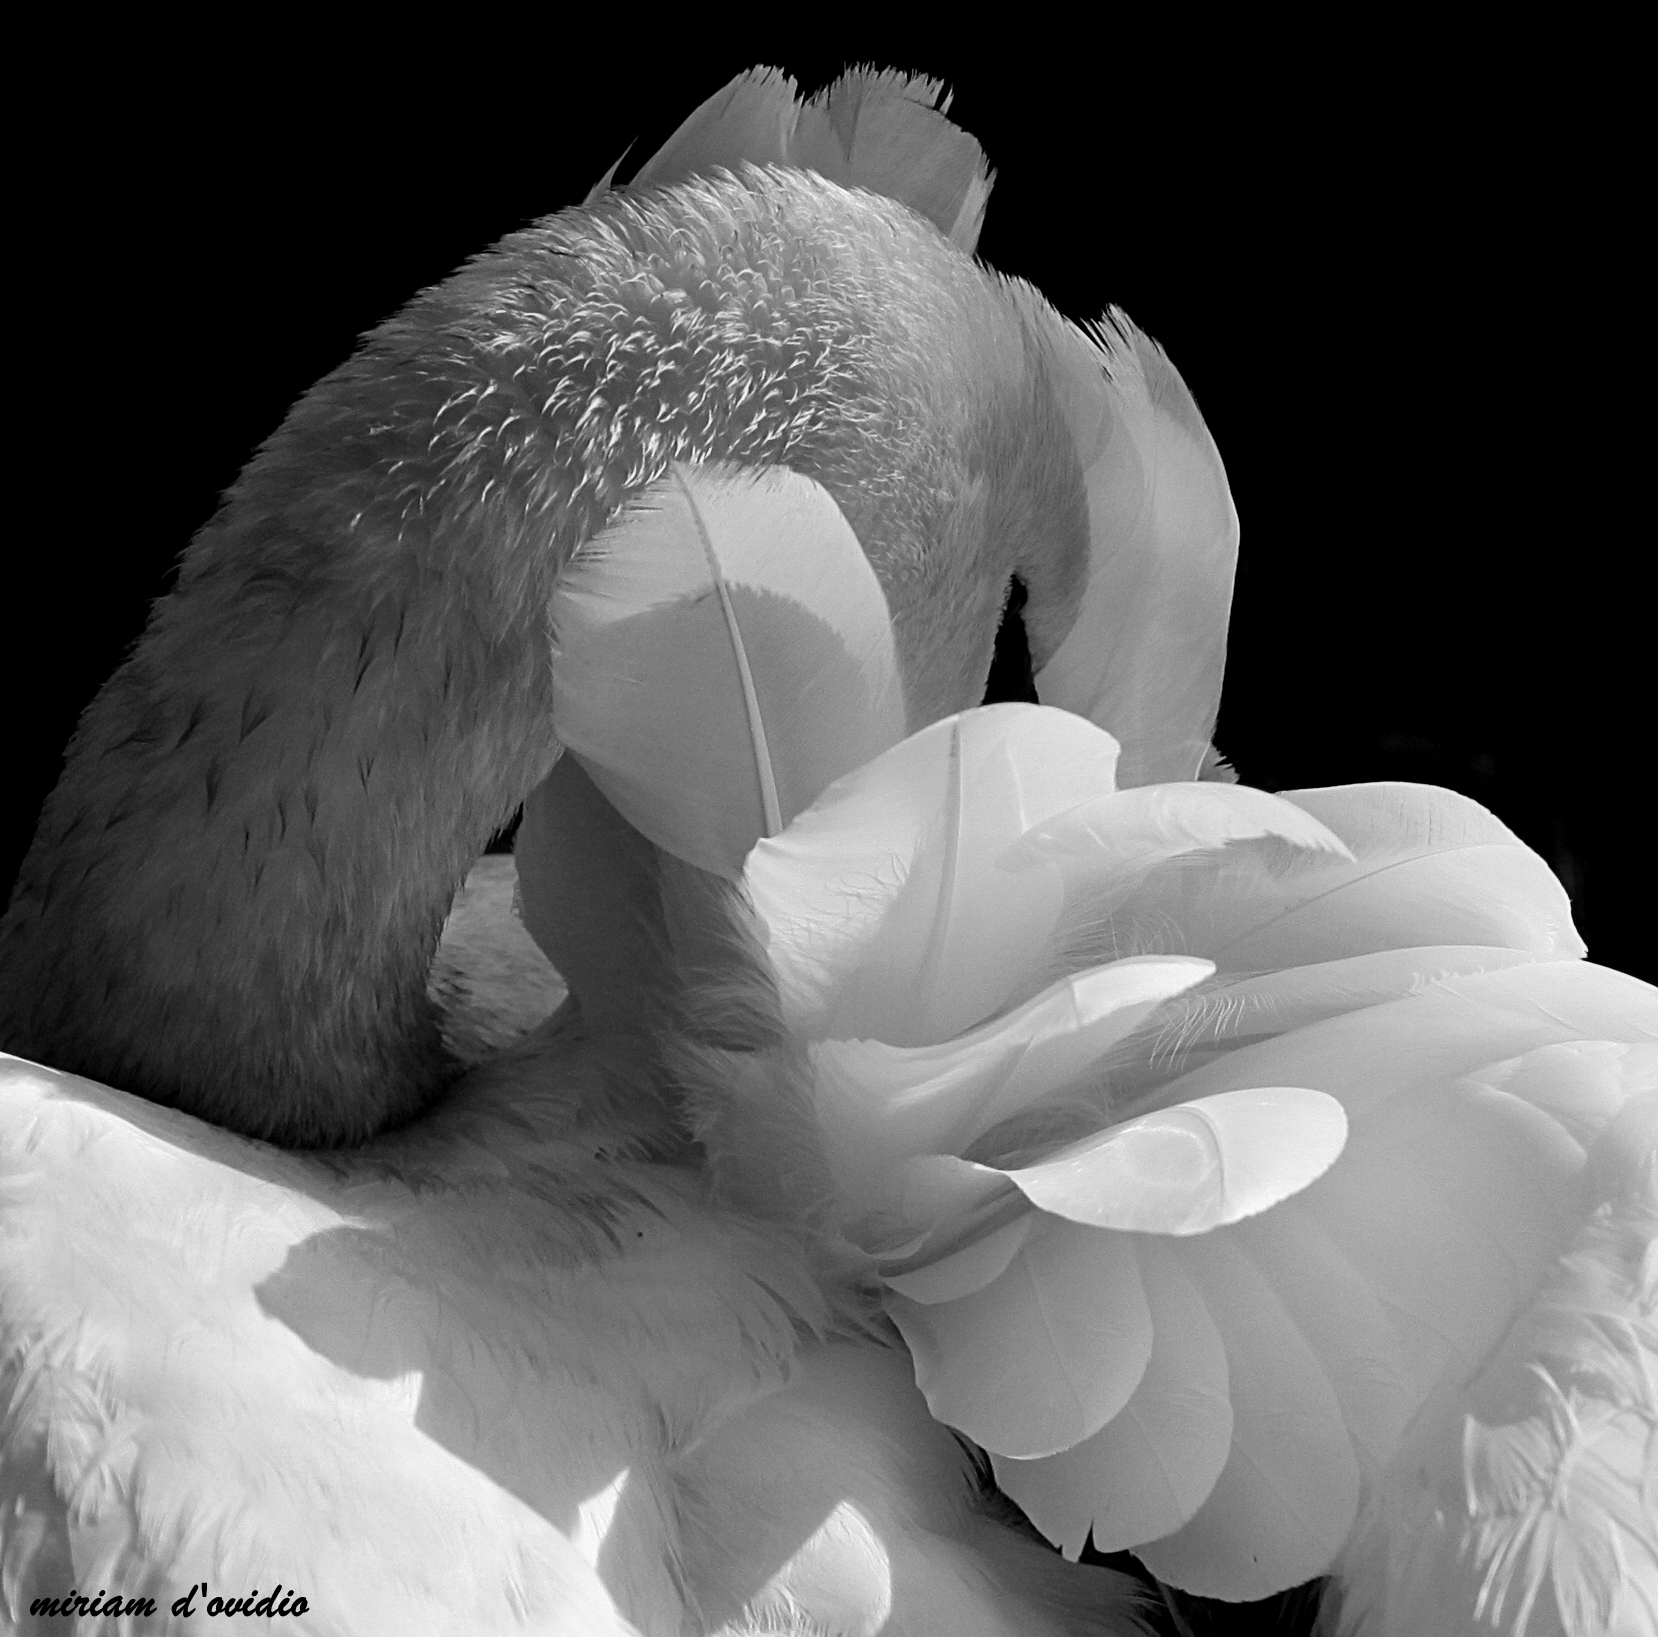 Sometimes the flowers have feathers and beak...